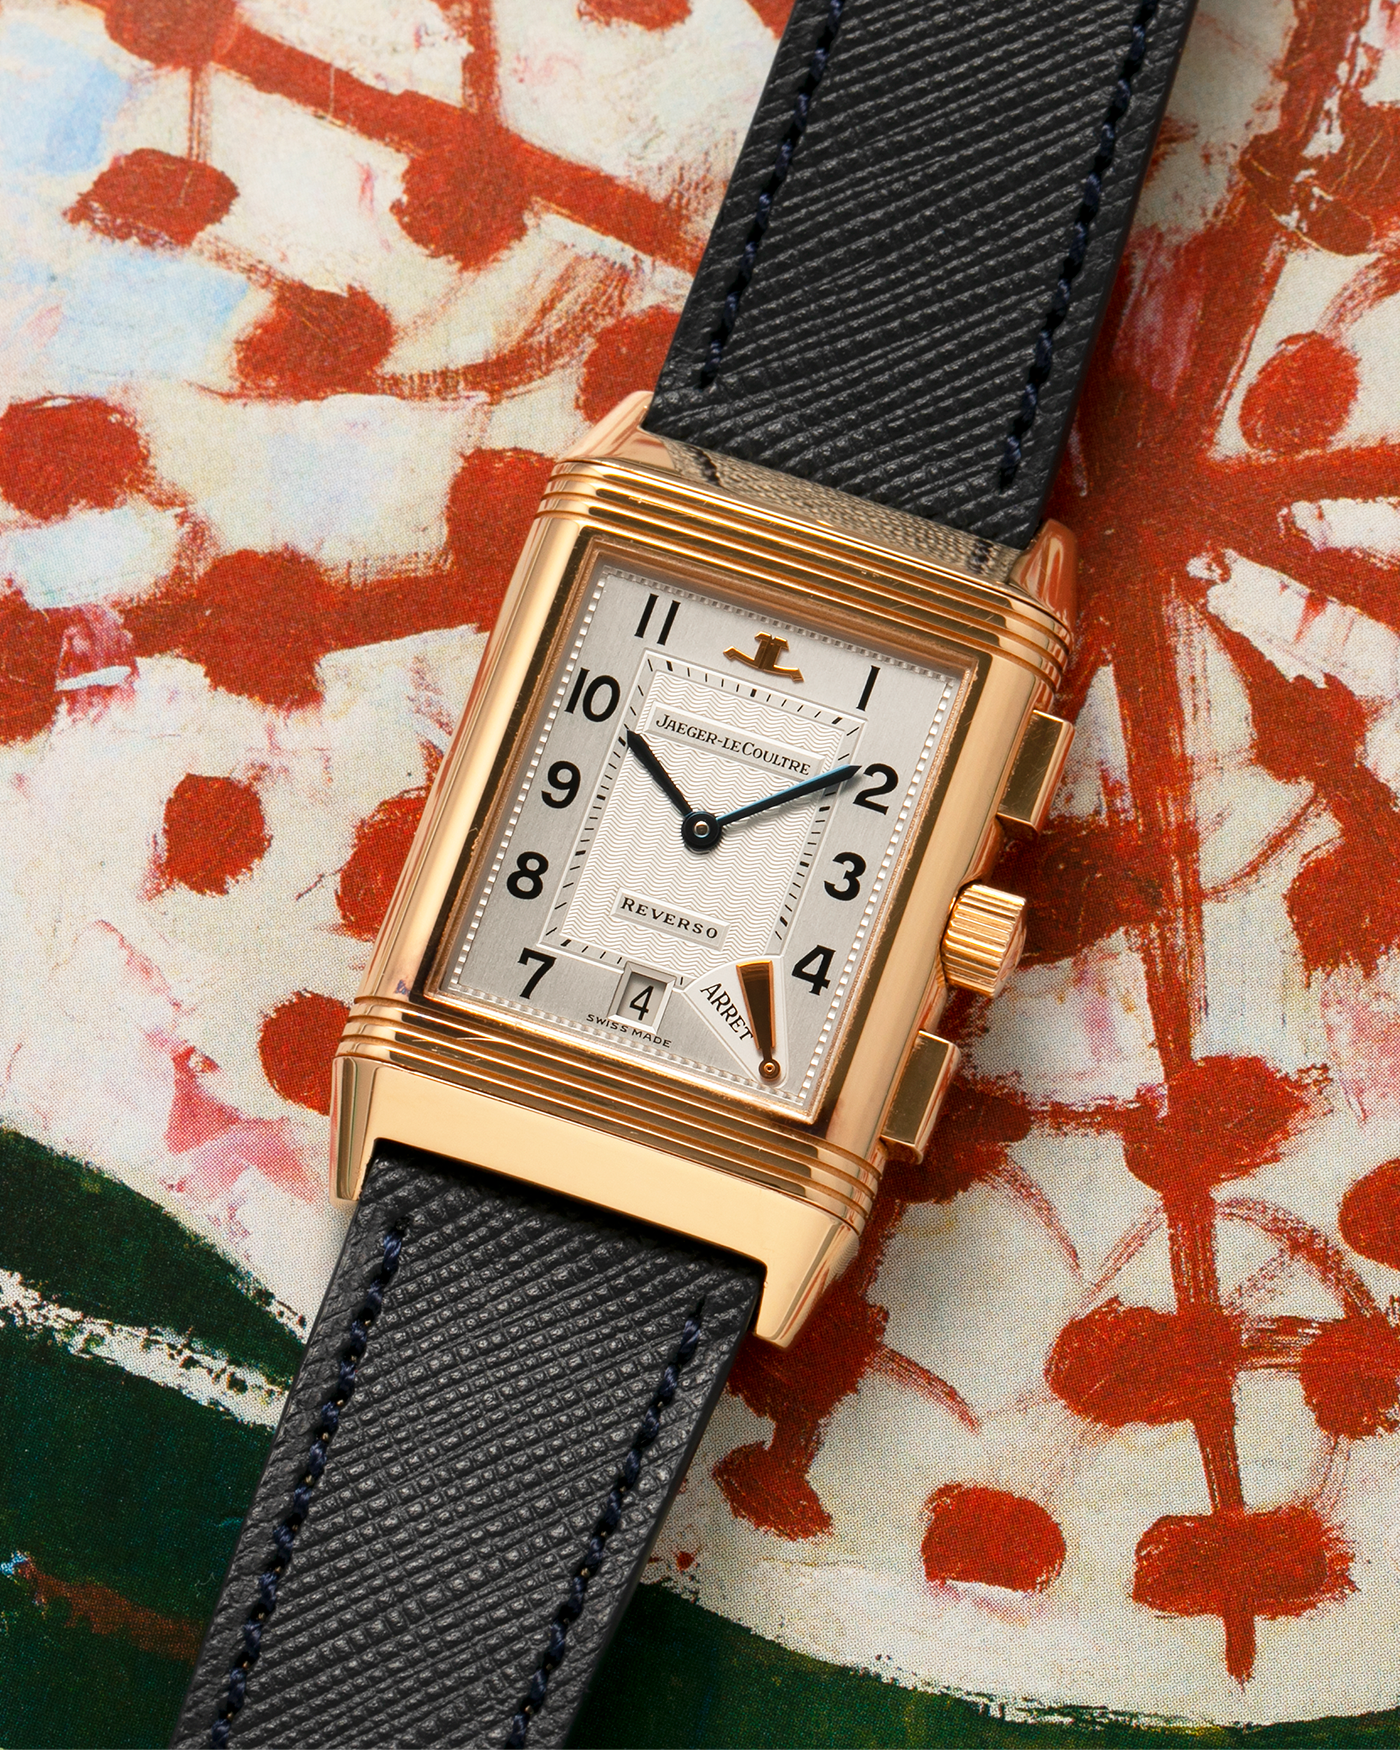 Brand: Jaeger LeCoultre Year: 1996 Model: Reverso Chronographe Retrograde, Limited to 500 pieces Reference: 270.2.69 Material: 18-carat Rose Gold Movement: Jaeger LeCoultre Cal. 829, Manual-Wind Case Dimensions: 42mm x 26mm x 9.5mm Lug Width: 19mm Strap: Molequin Navy Blue Textured Calf with Signed 18-carat Rose Gold Deployant Clasp